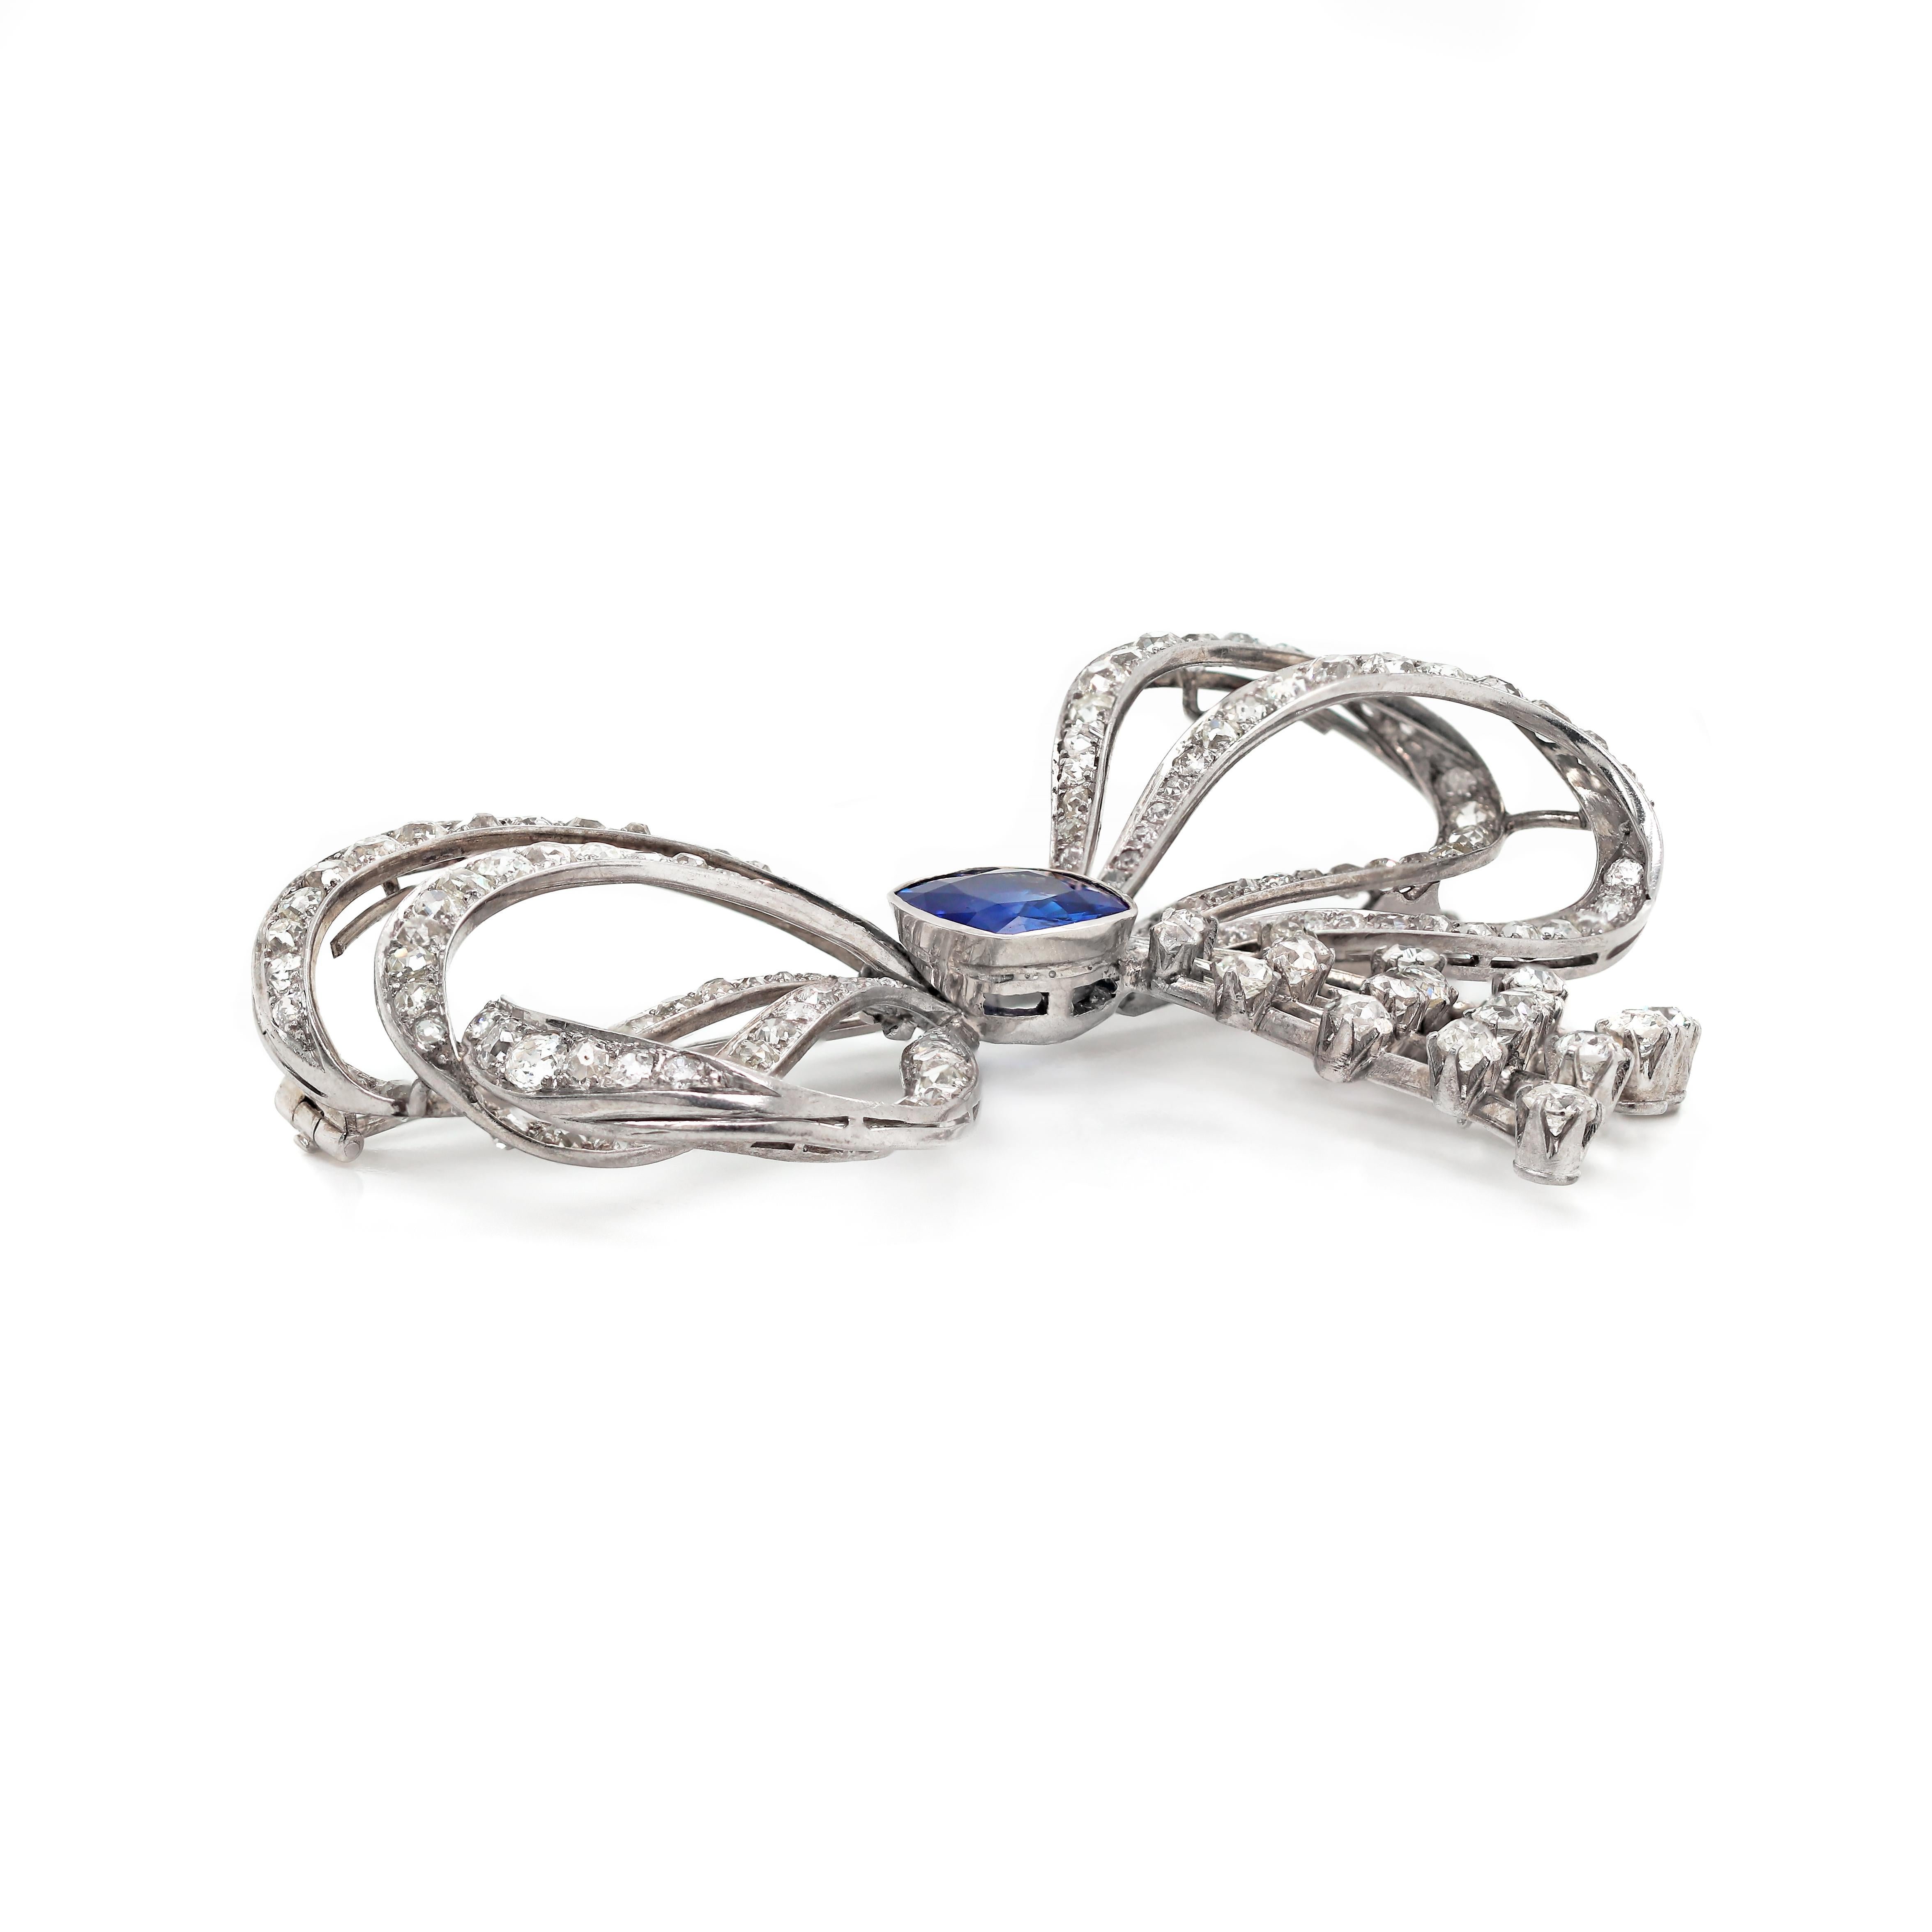 This exceptional 1930's handmade brooch/ pendant features a cushion shaped blue sapphire weighing approximately 5.00ct in an open back, rub over setting, mounted in the centre of a bow. The ribbons are pavé set with 136 old mine cut diamonds and the